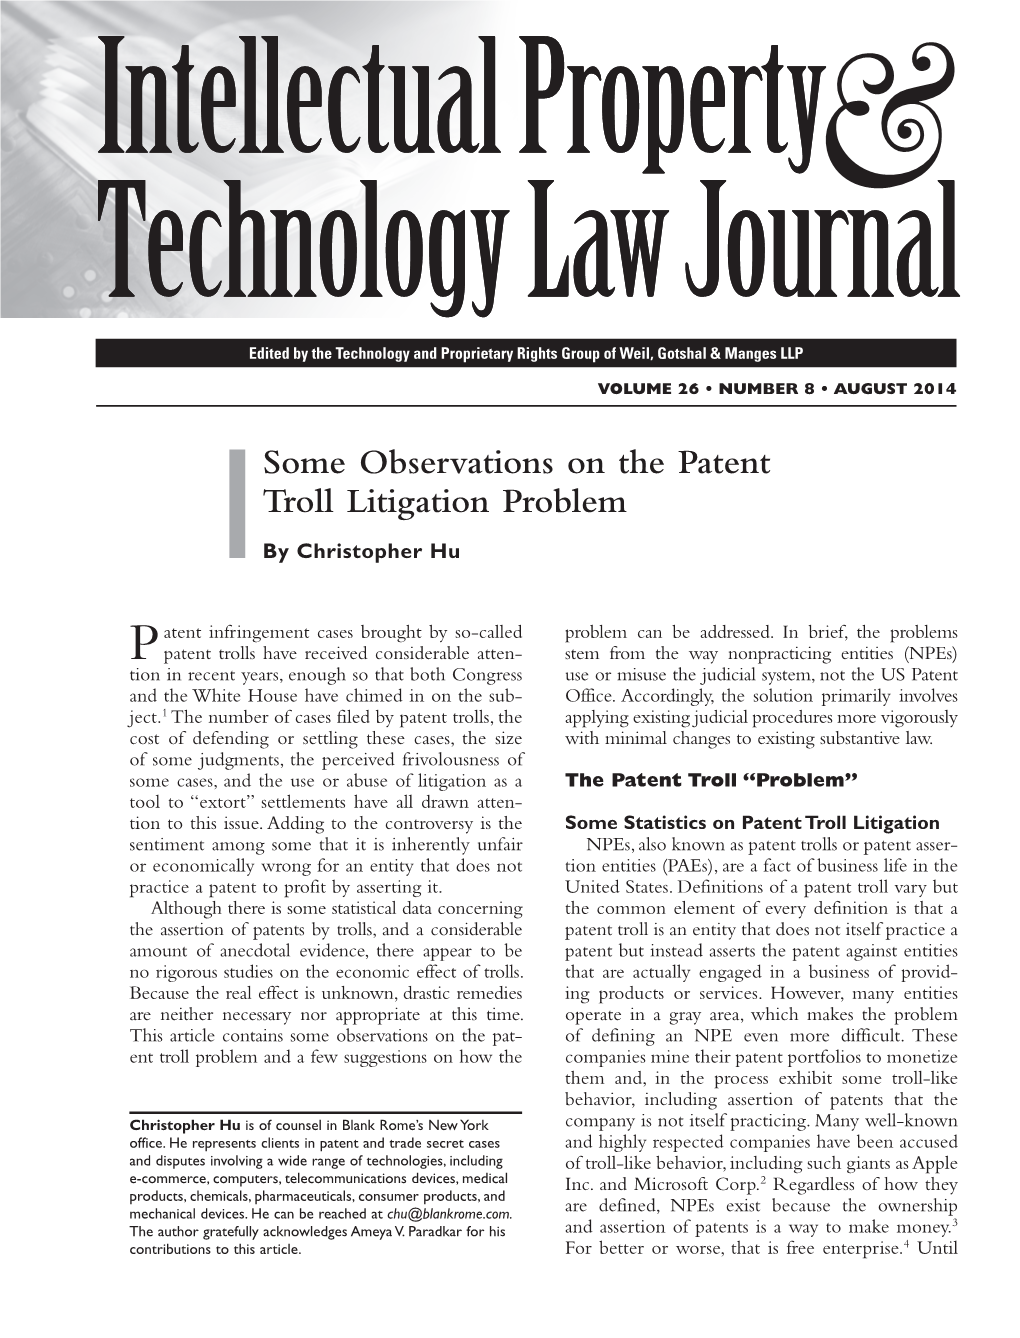 Some Observations on the Patent Troll Litigation Problem